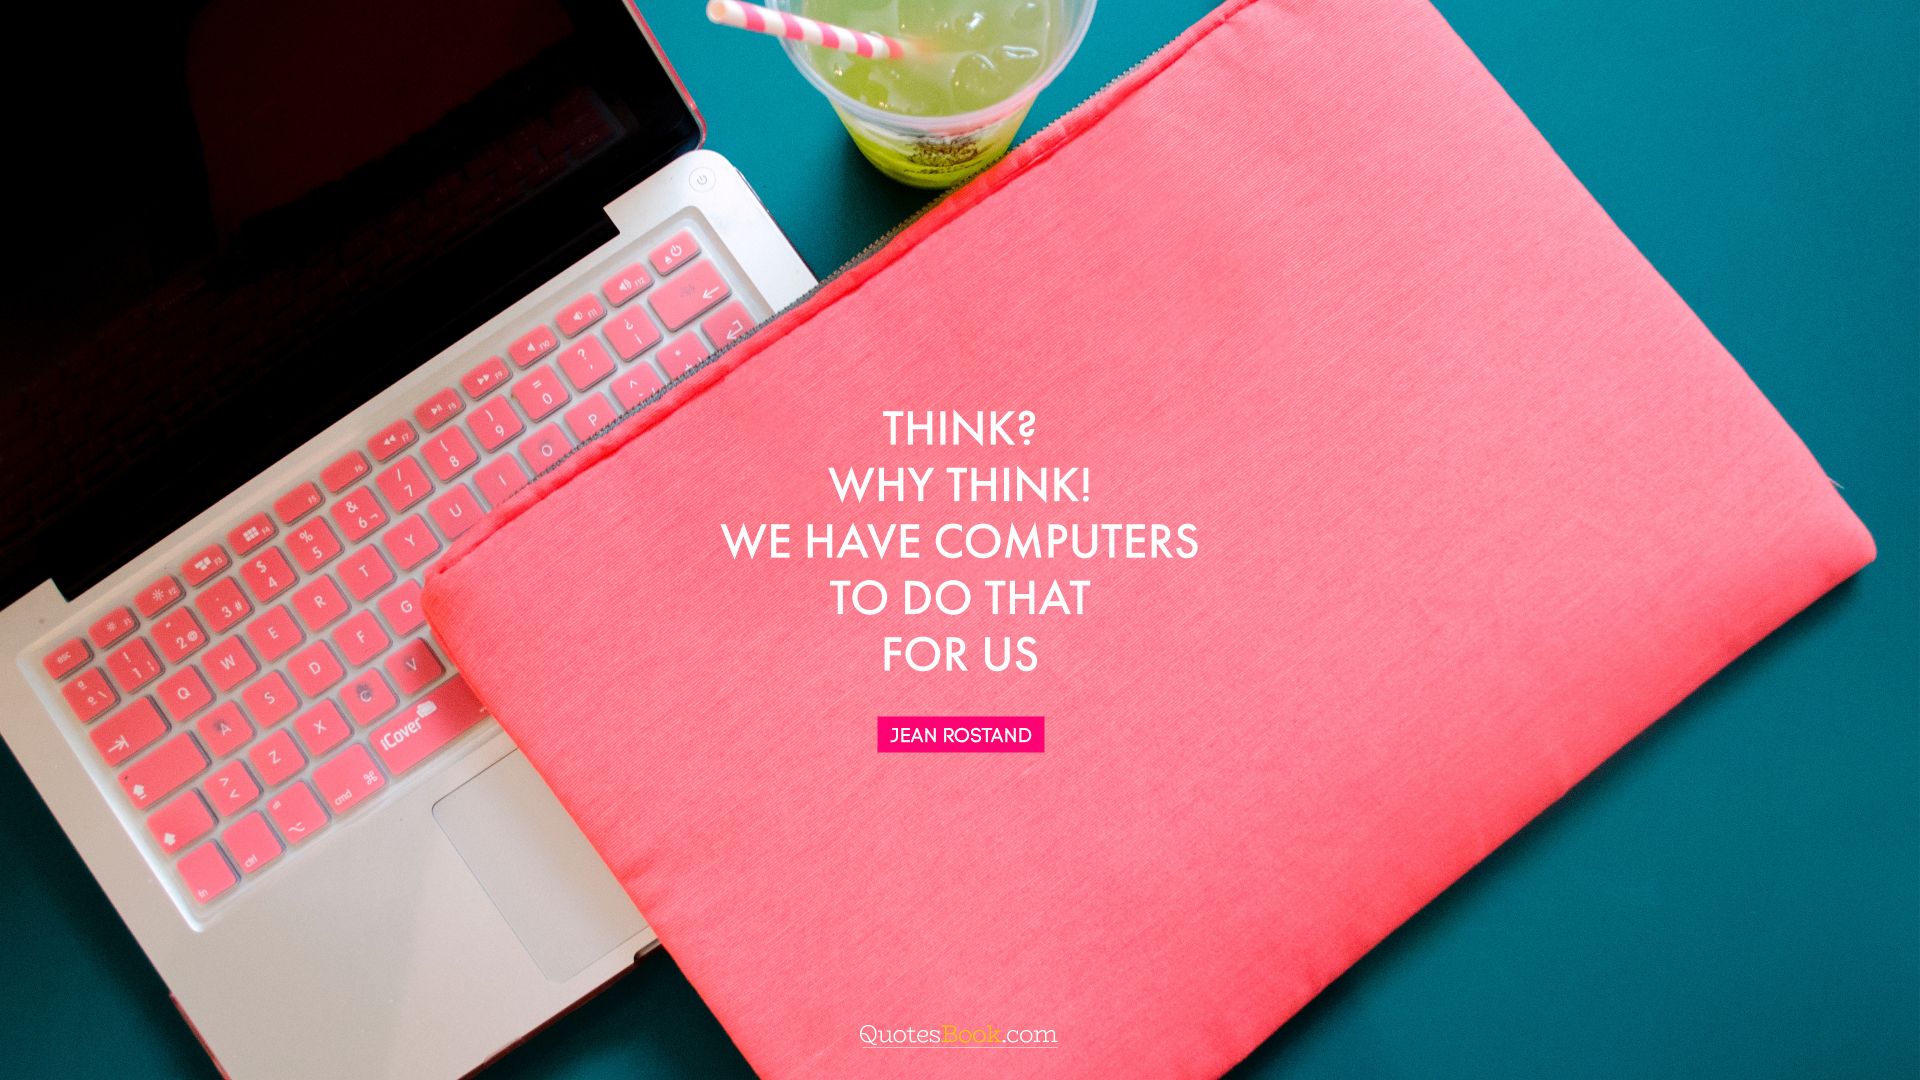 Think? Why think! We have computers to do that for us. - Quote by Jean Rostand